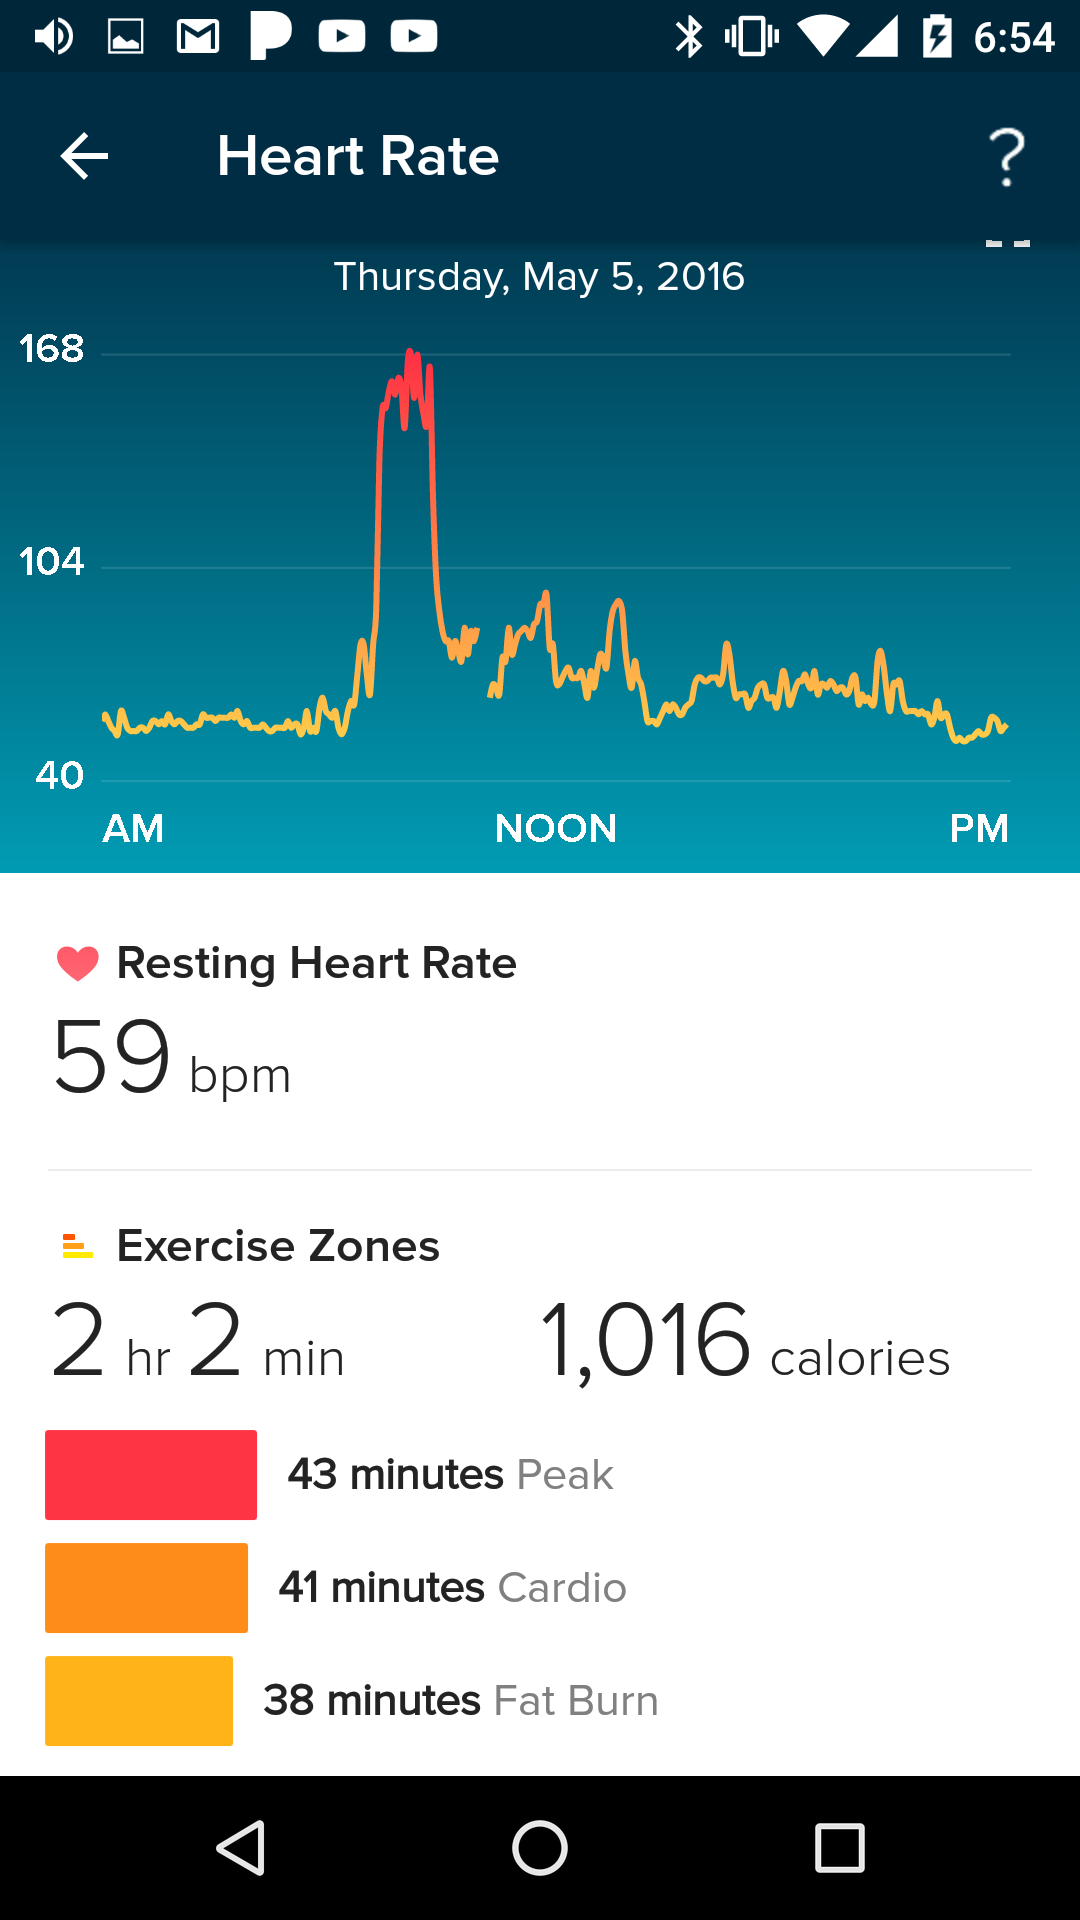 Sitting Heart Rate Chart